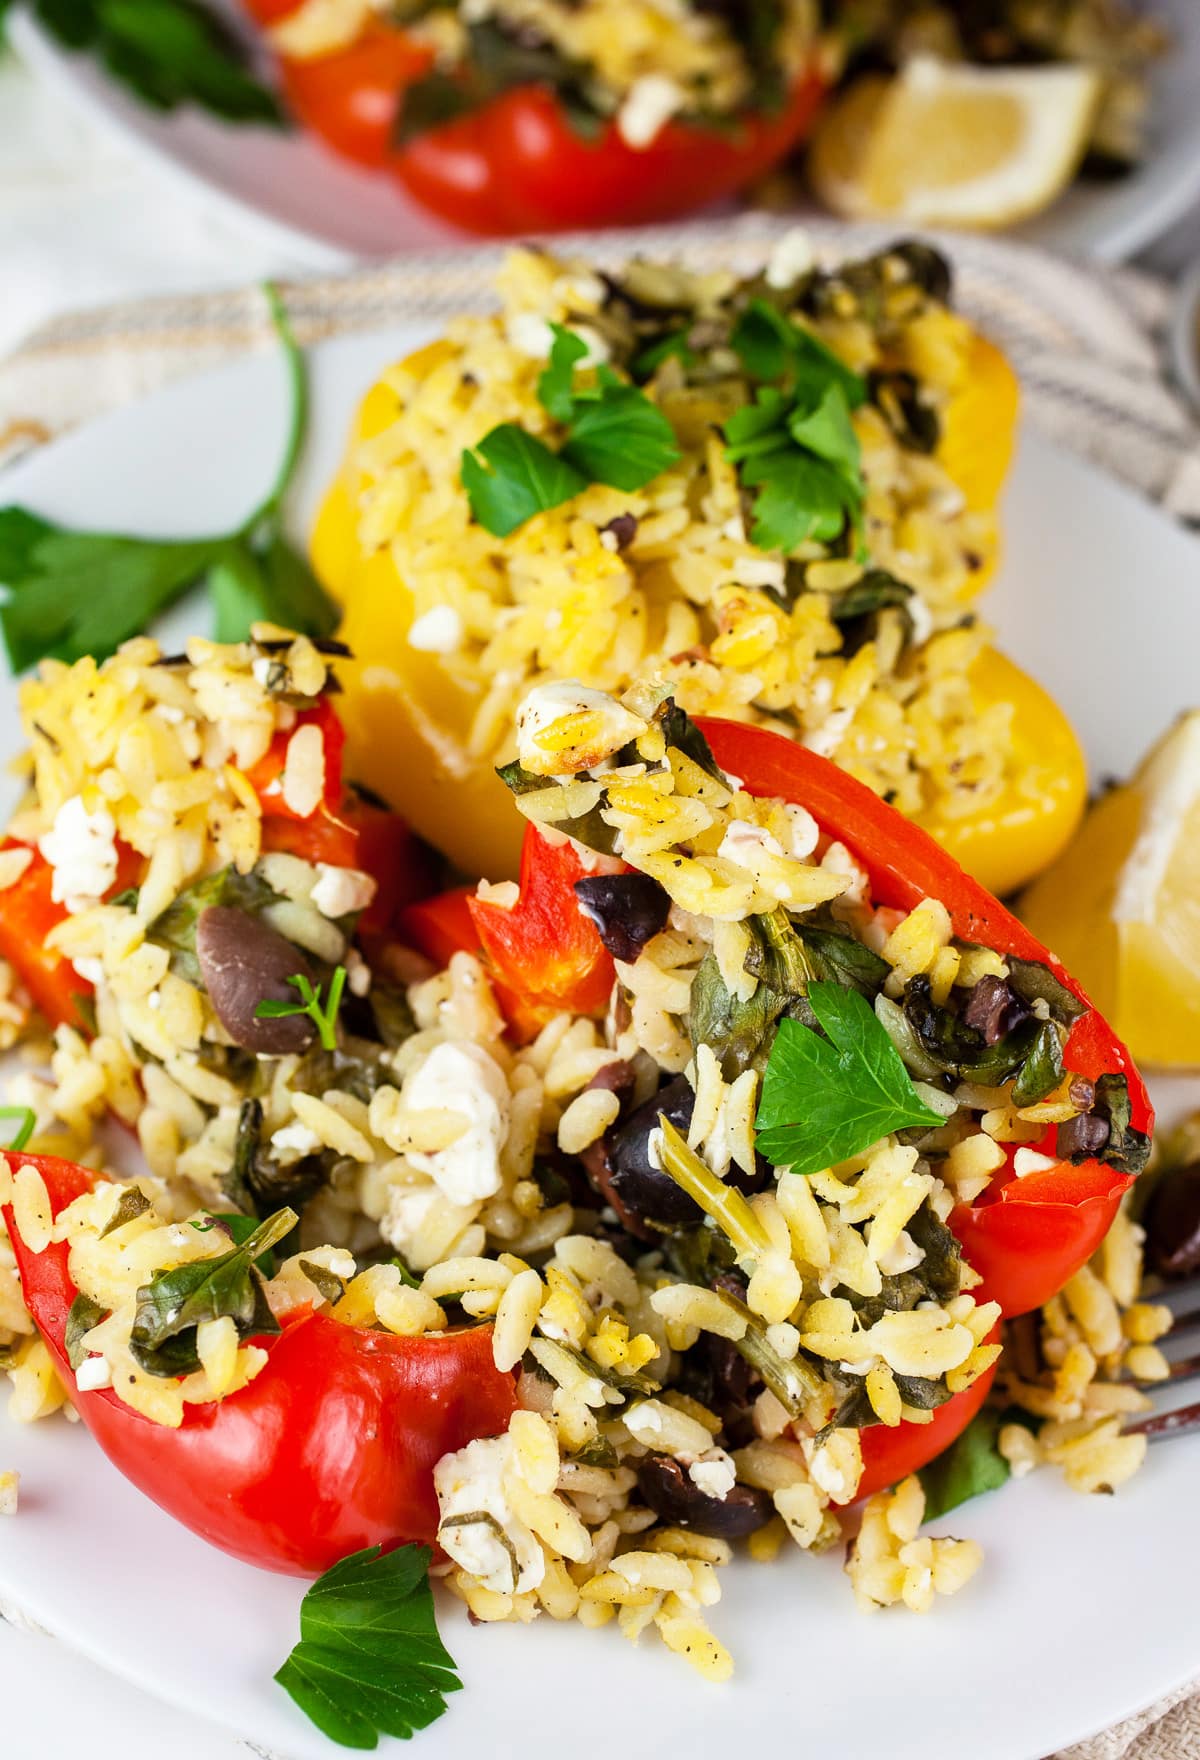 Greek orzo stuffed peppers with parsley and lemon wedges.